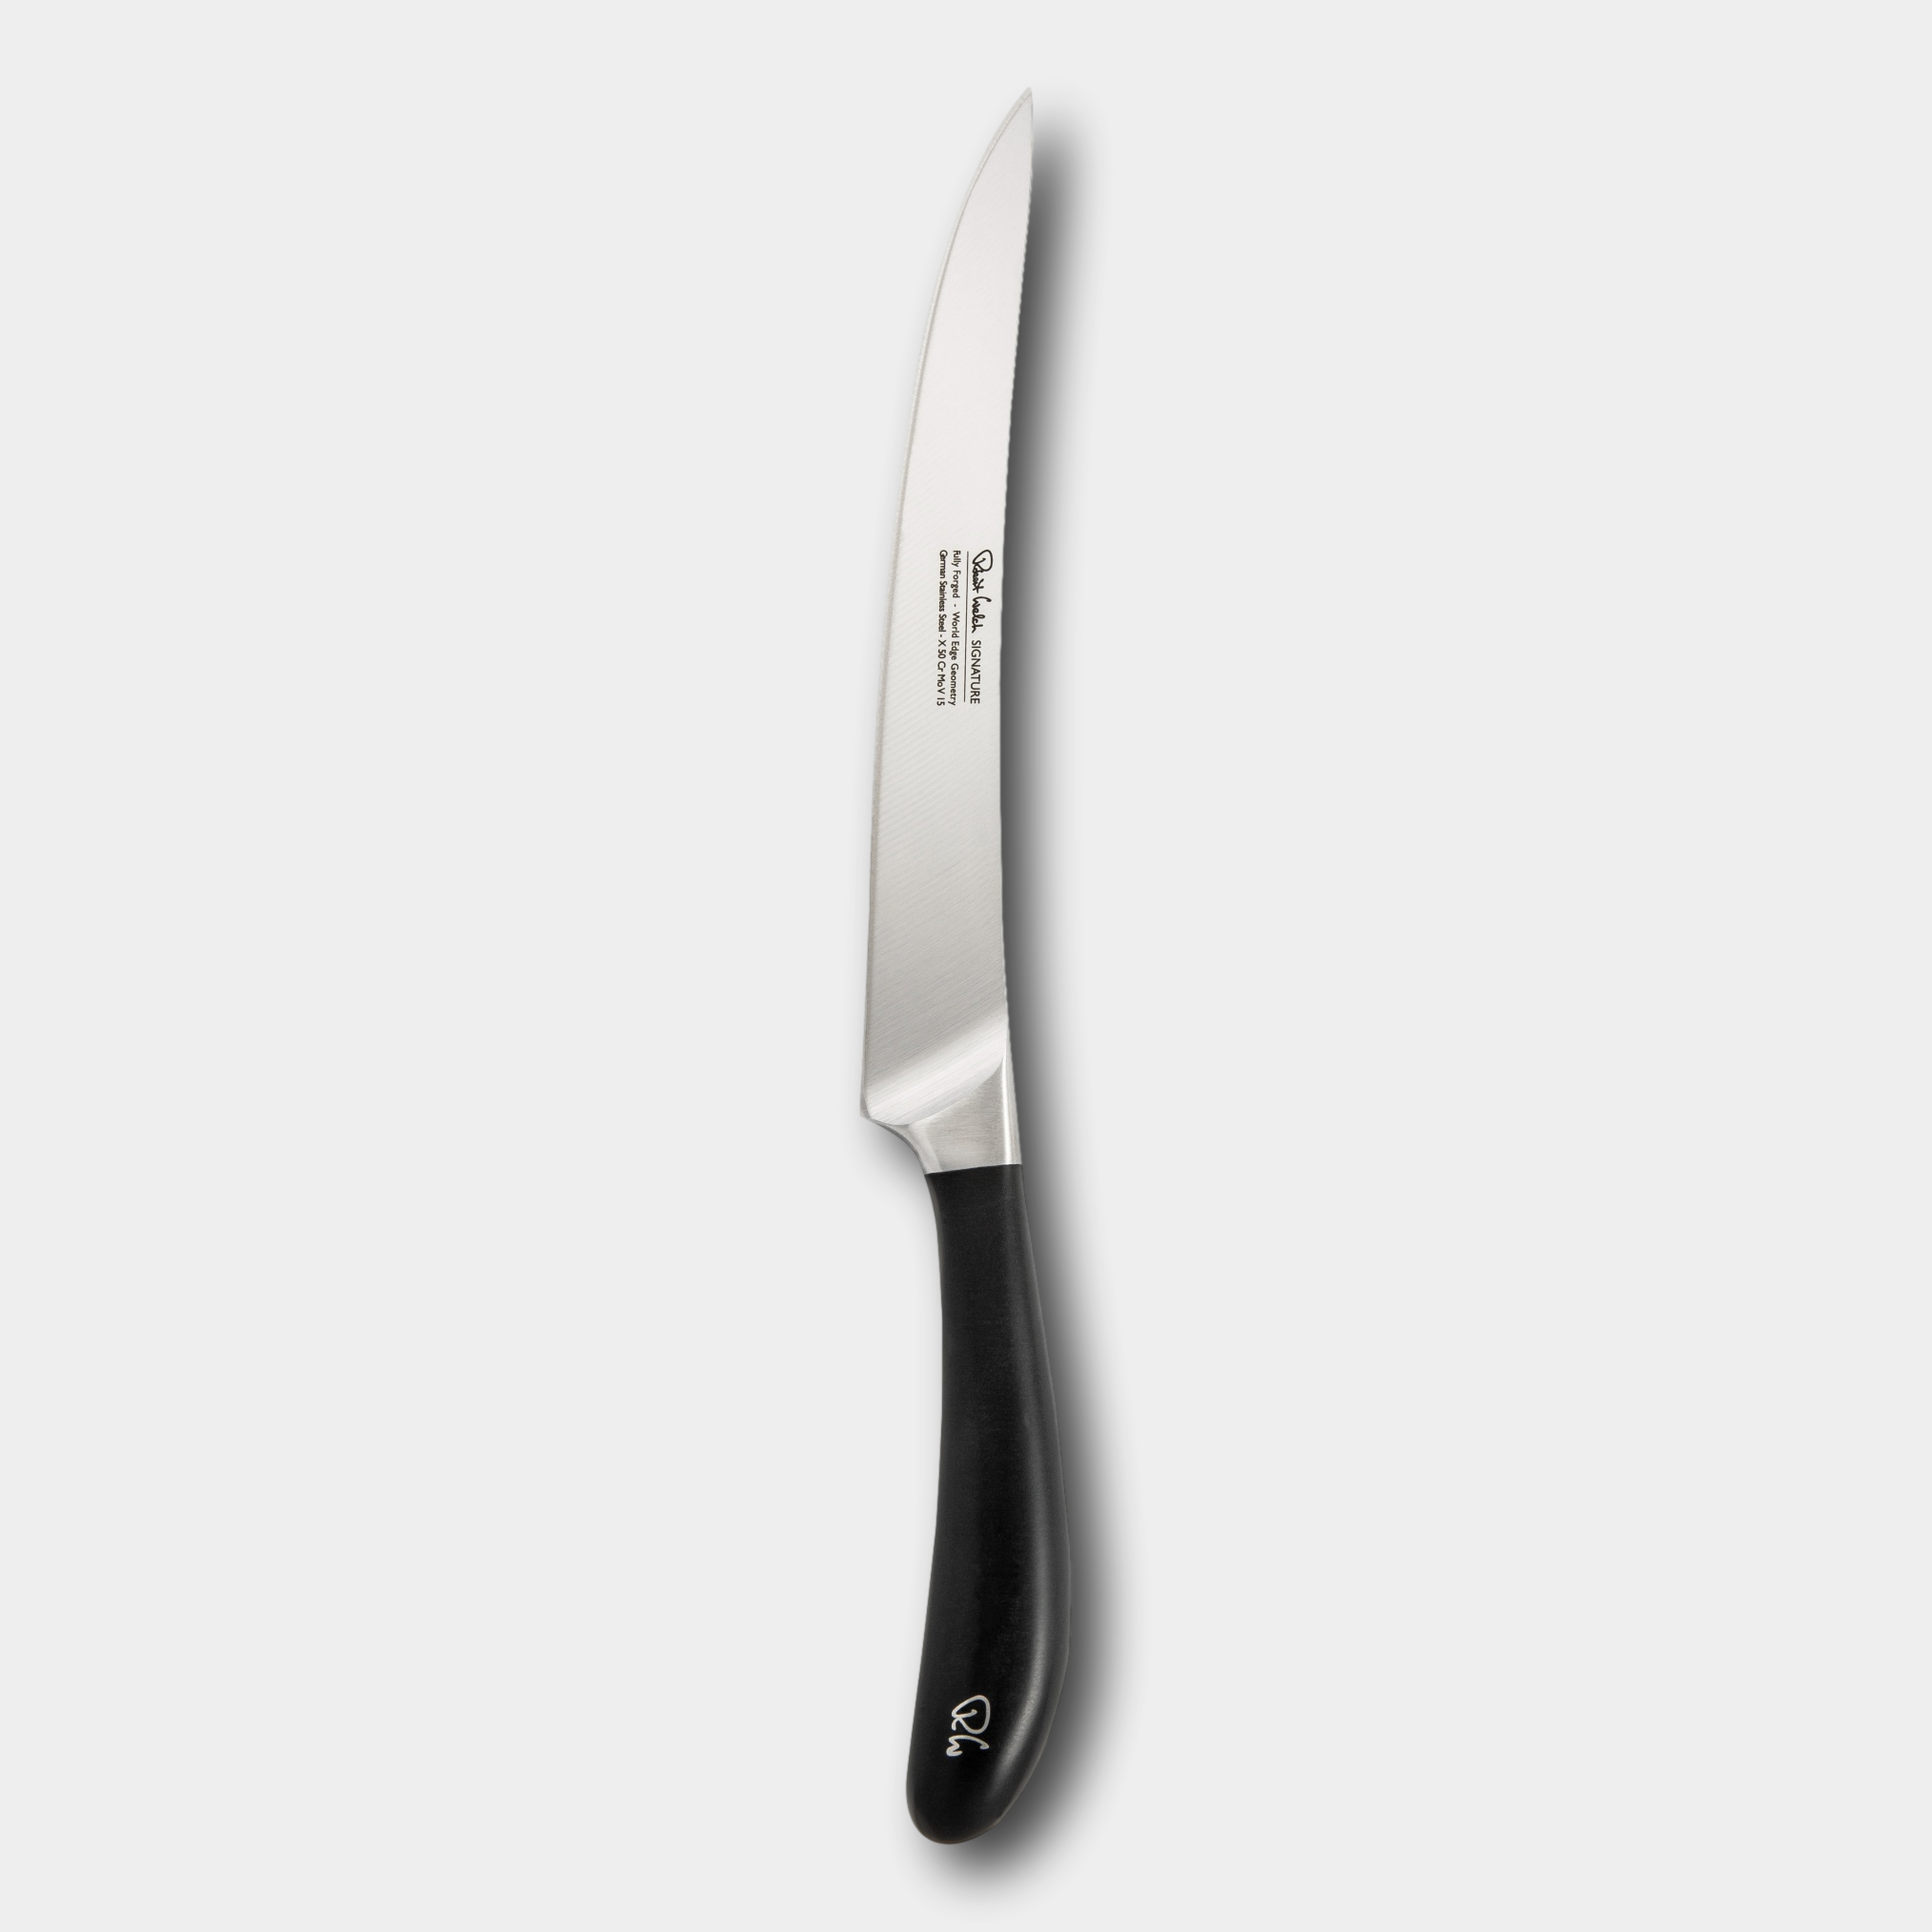 Robert Welch Signature 20cm Carving Knife